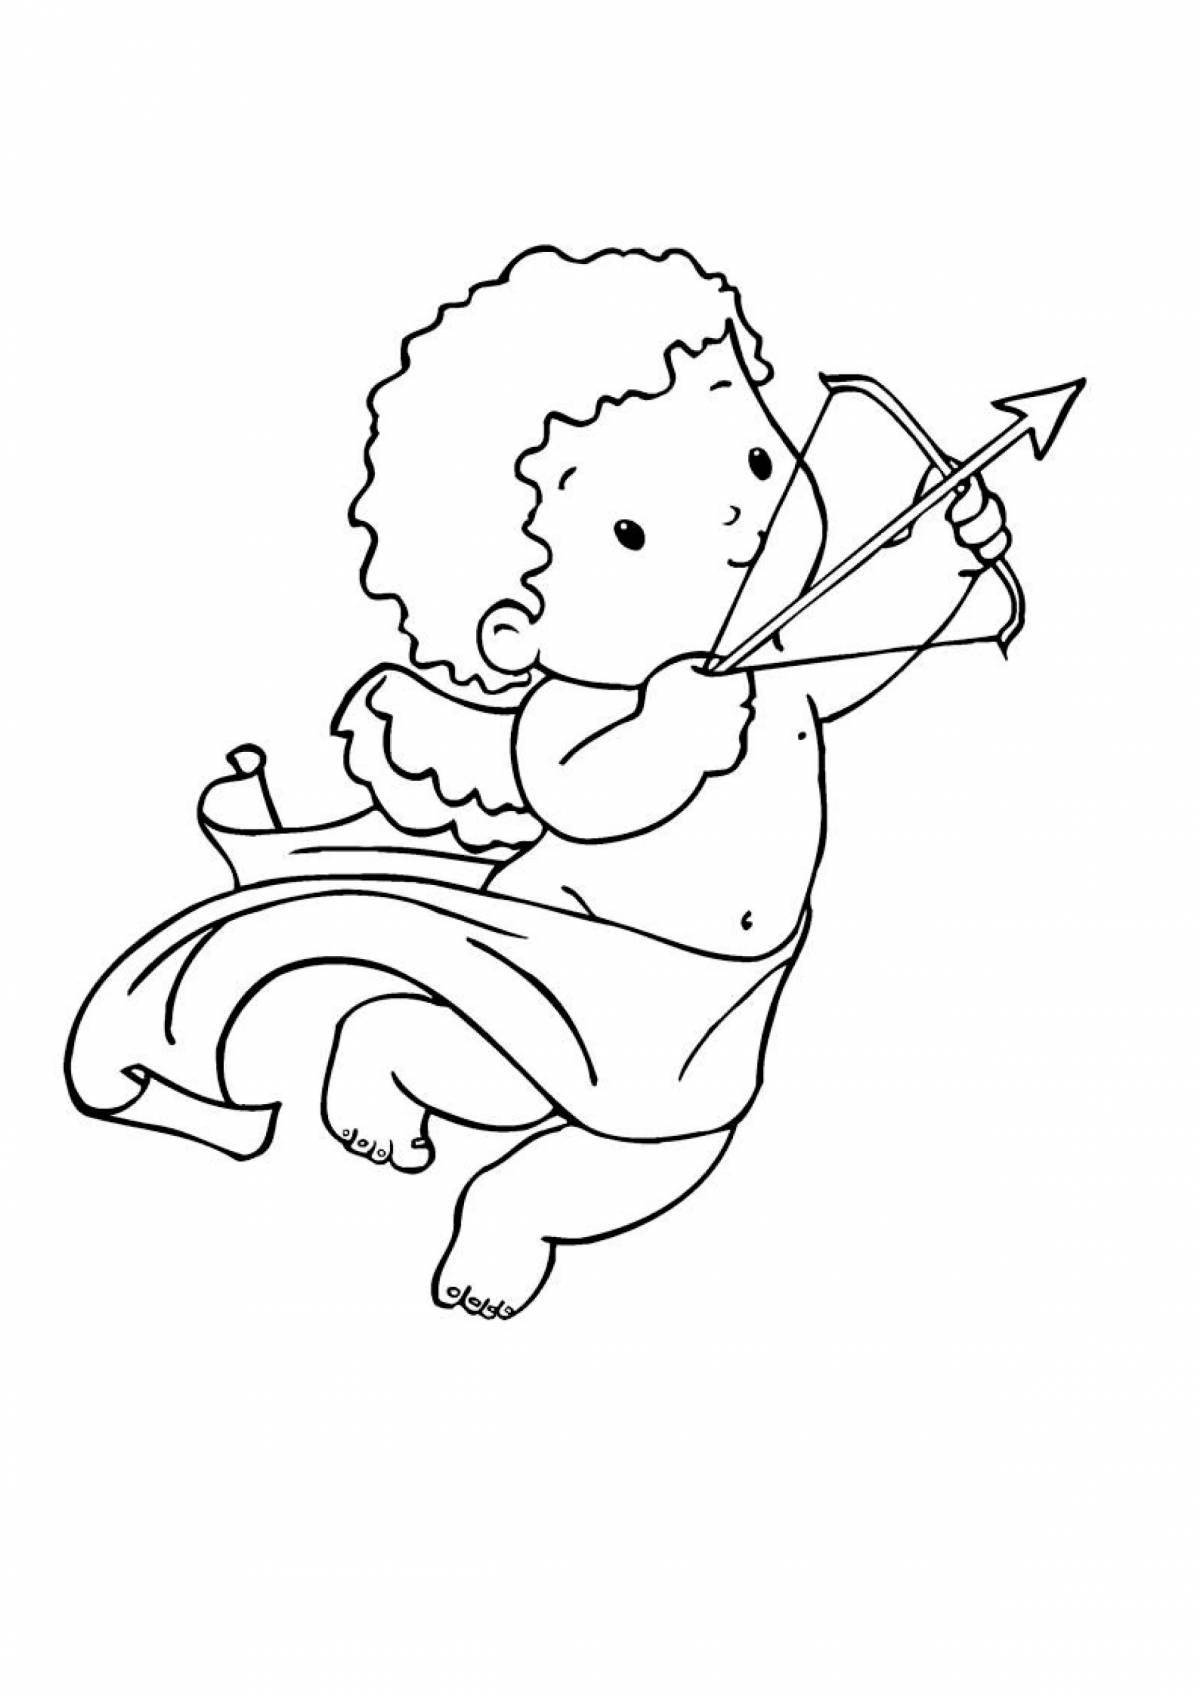 Sweet cupid coloring page